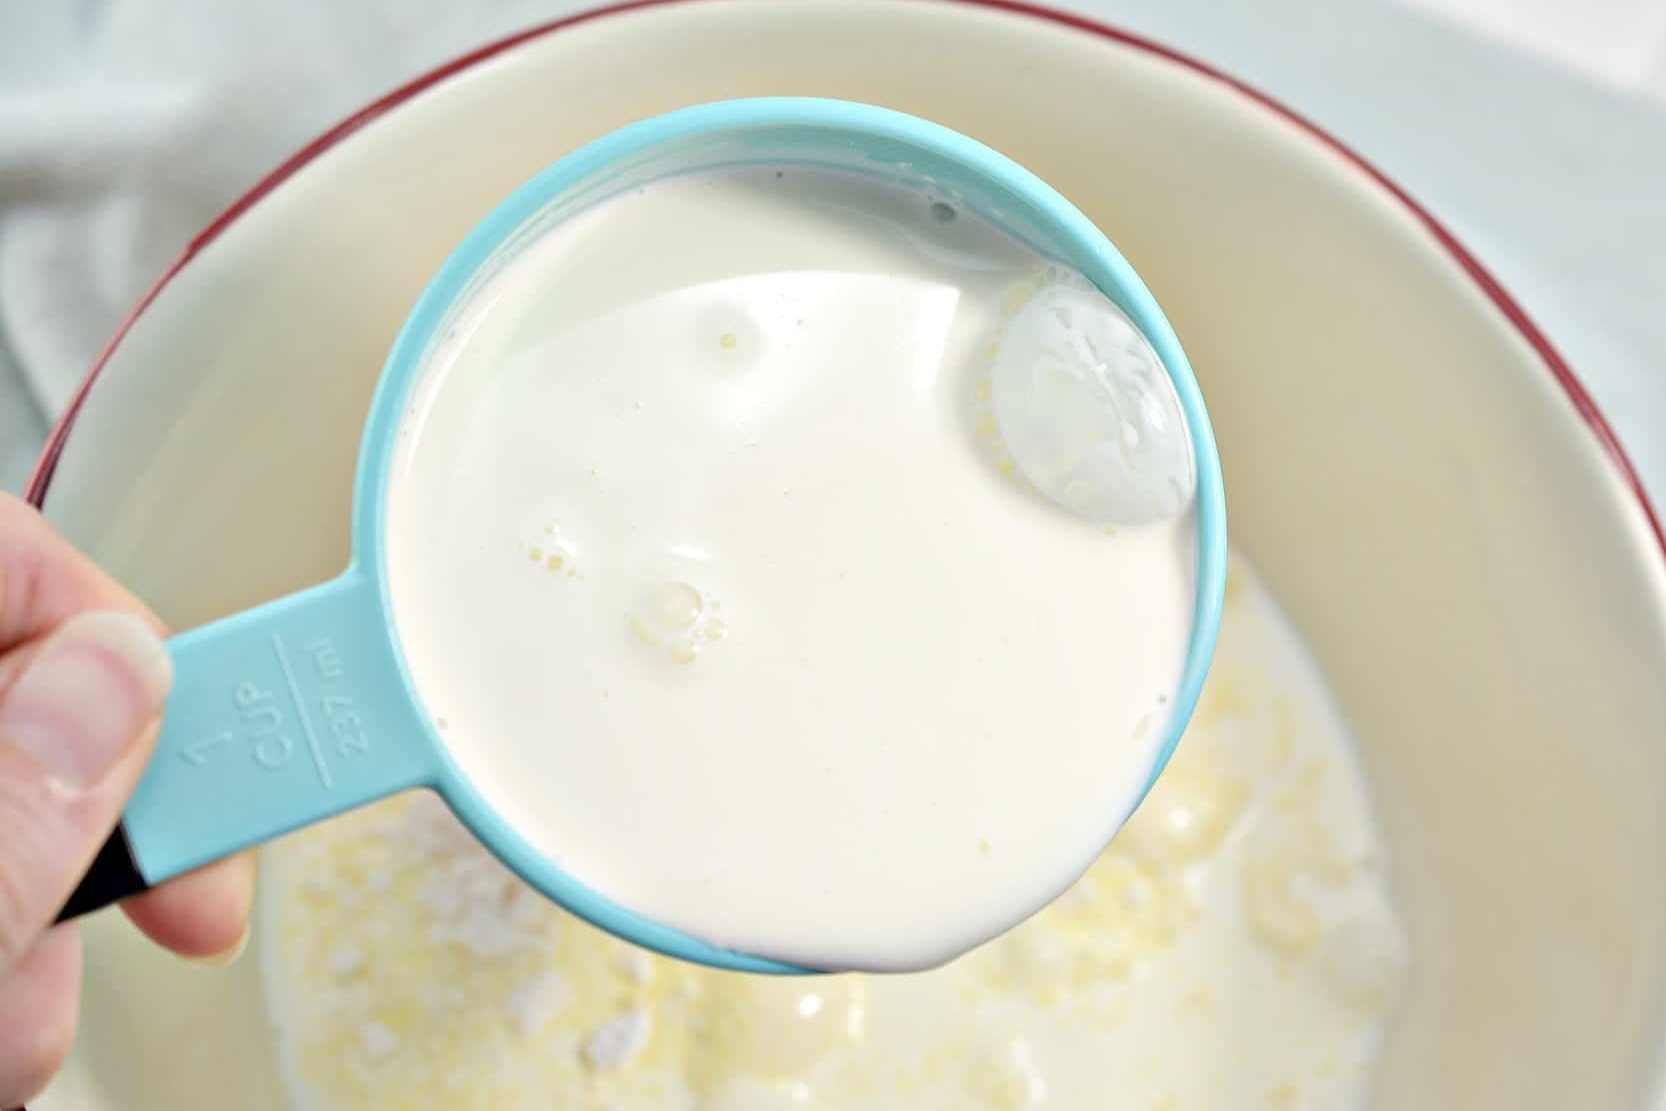 Start by mixing 2 cups of heavy whipping cream and 1 box of Instant vanilla pudding mix.